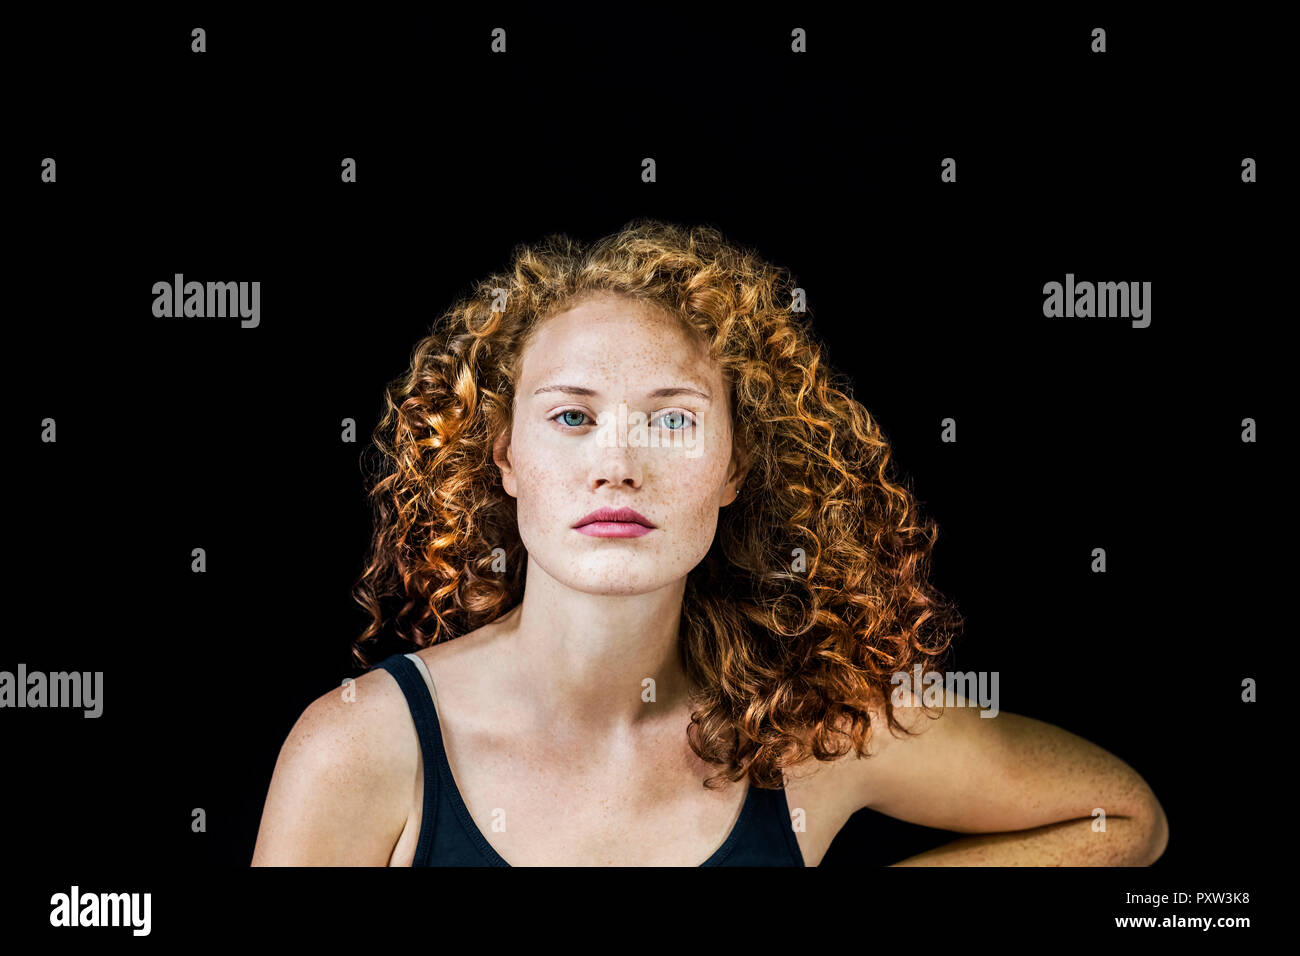 Portrait of freckled young woman with curly red hair in front of black background Stock Photo